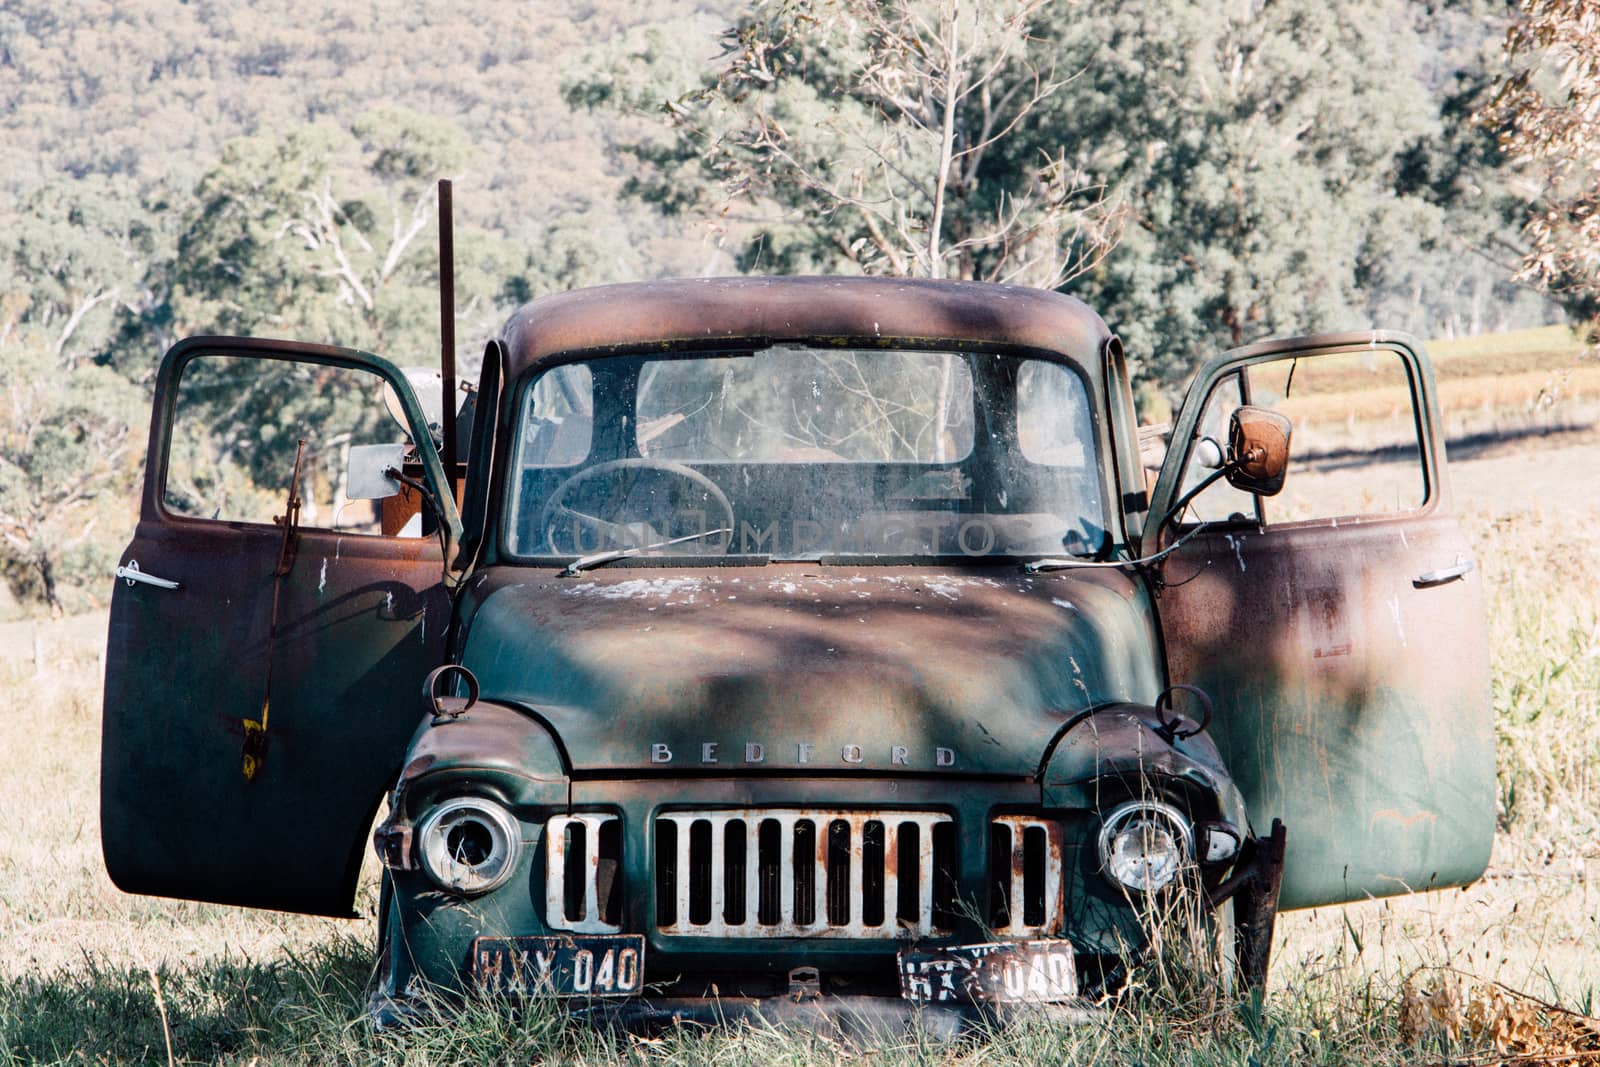 An old truck decaying and abandoned in the Australian bush.